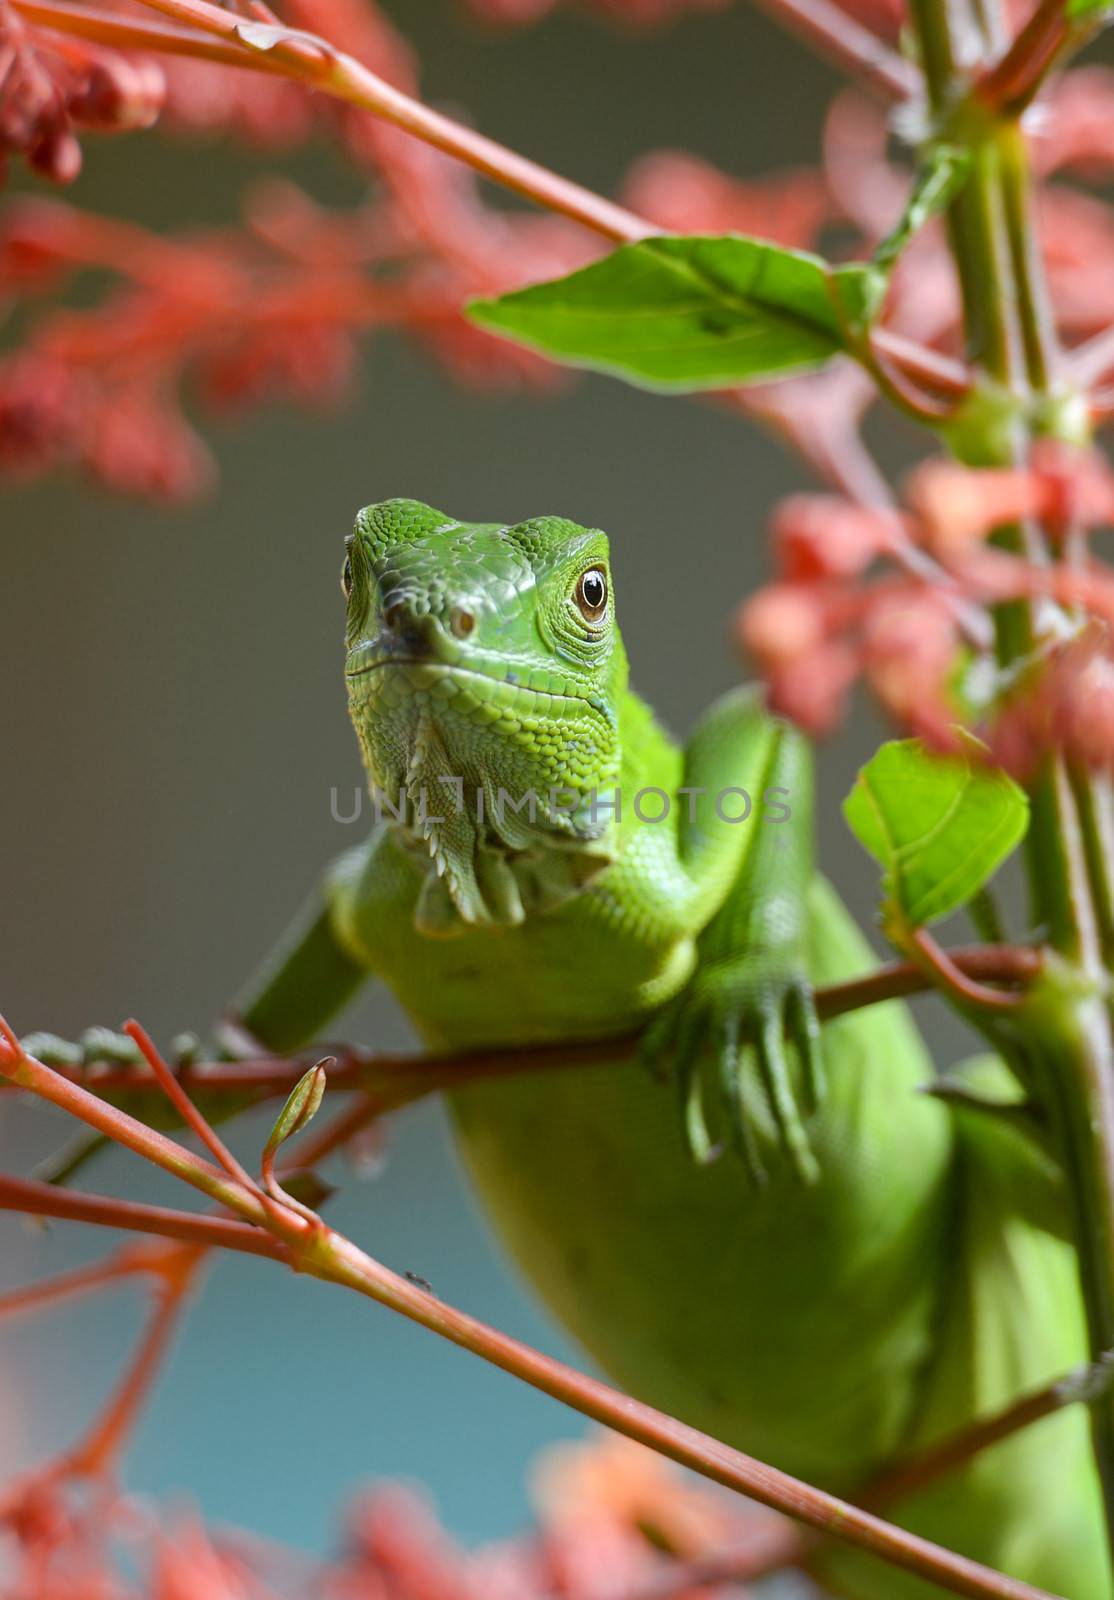 Green lizard staring at the camera over a branch